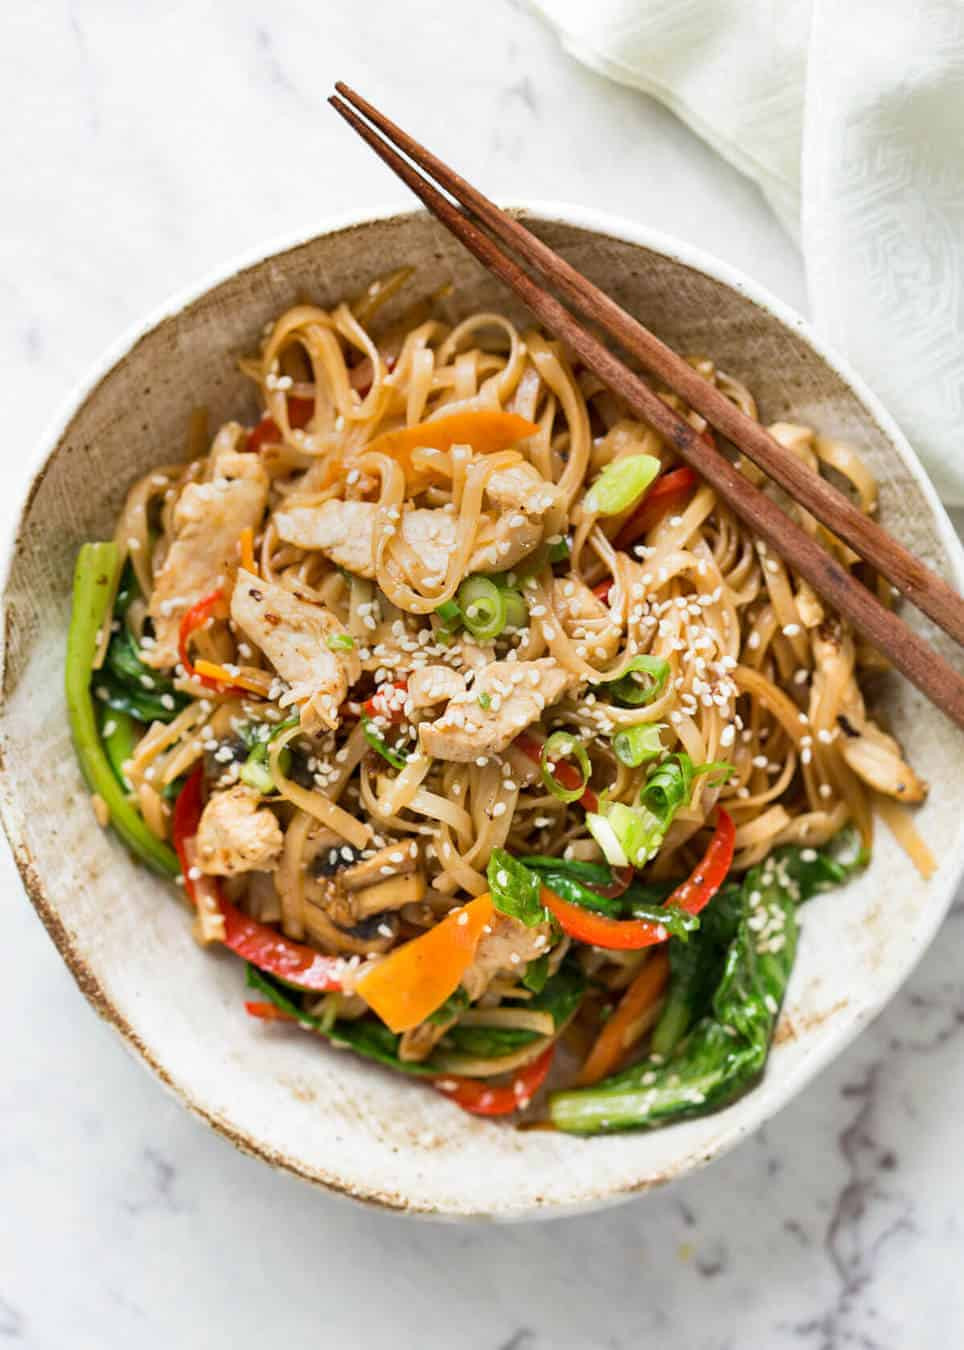 Recipes With Rice Noodles
 Chicken Stir Fry with Rice Noodles